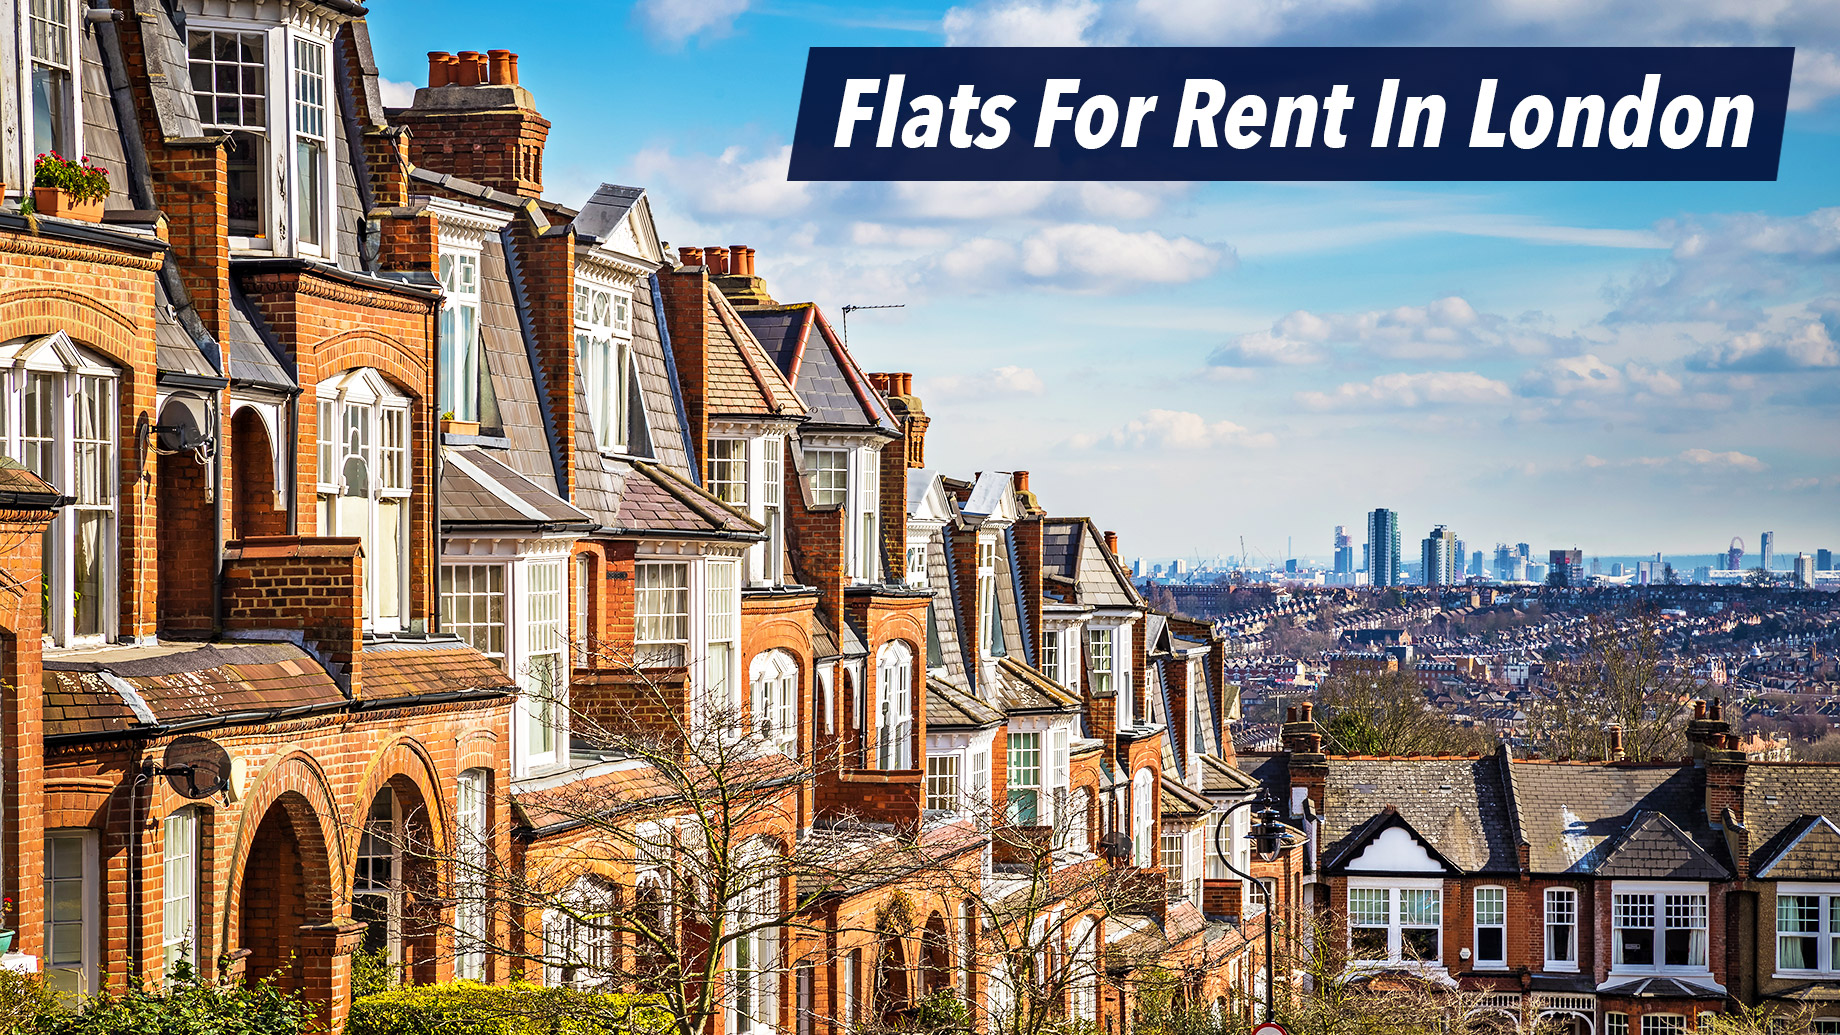 Flats For Rent In London